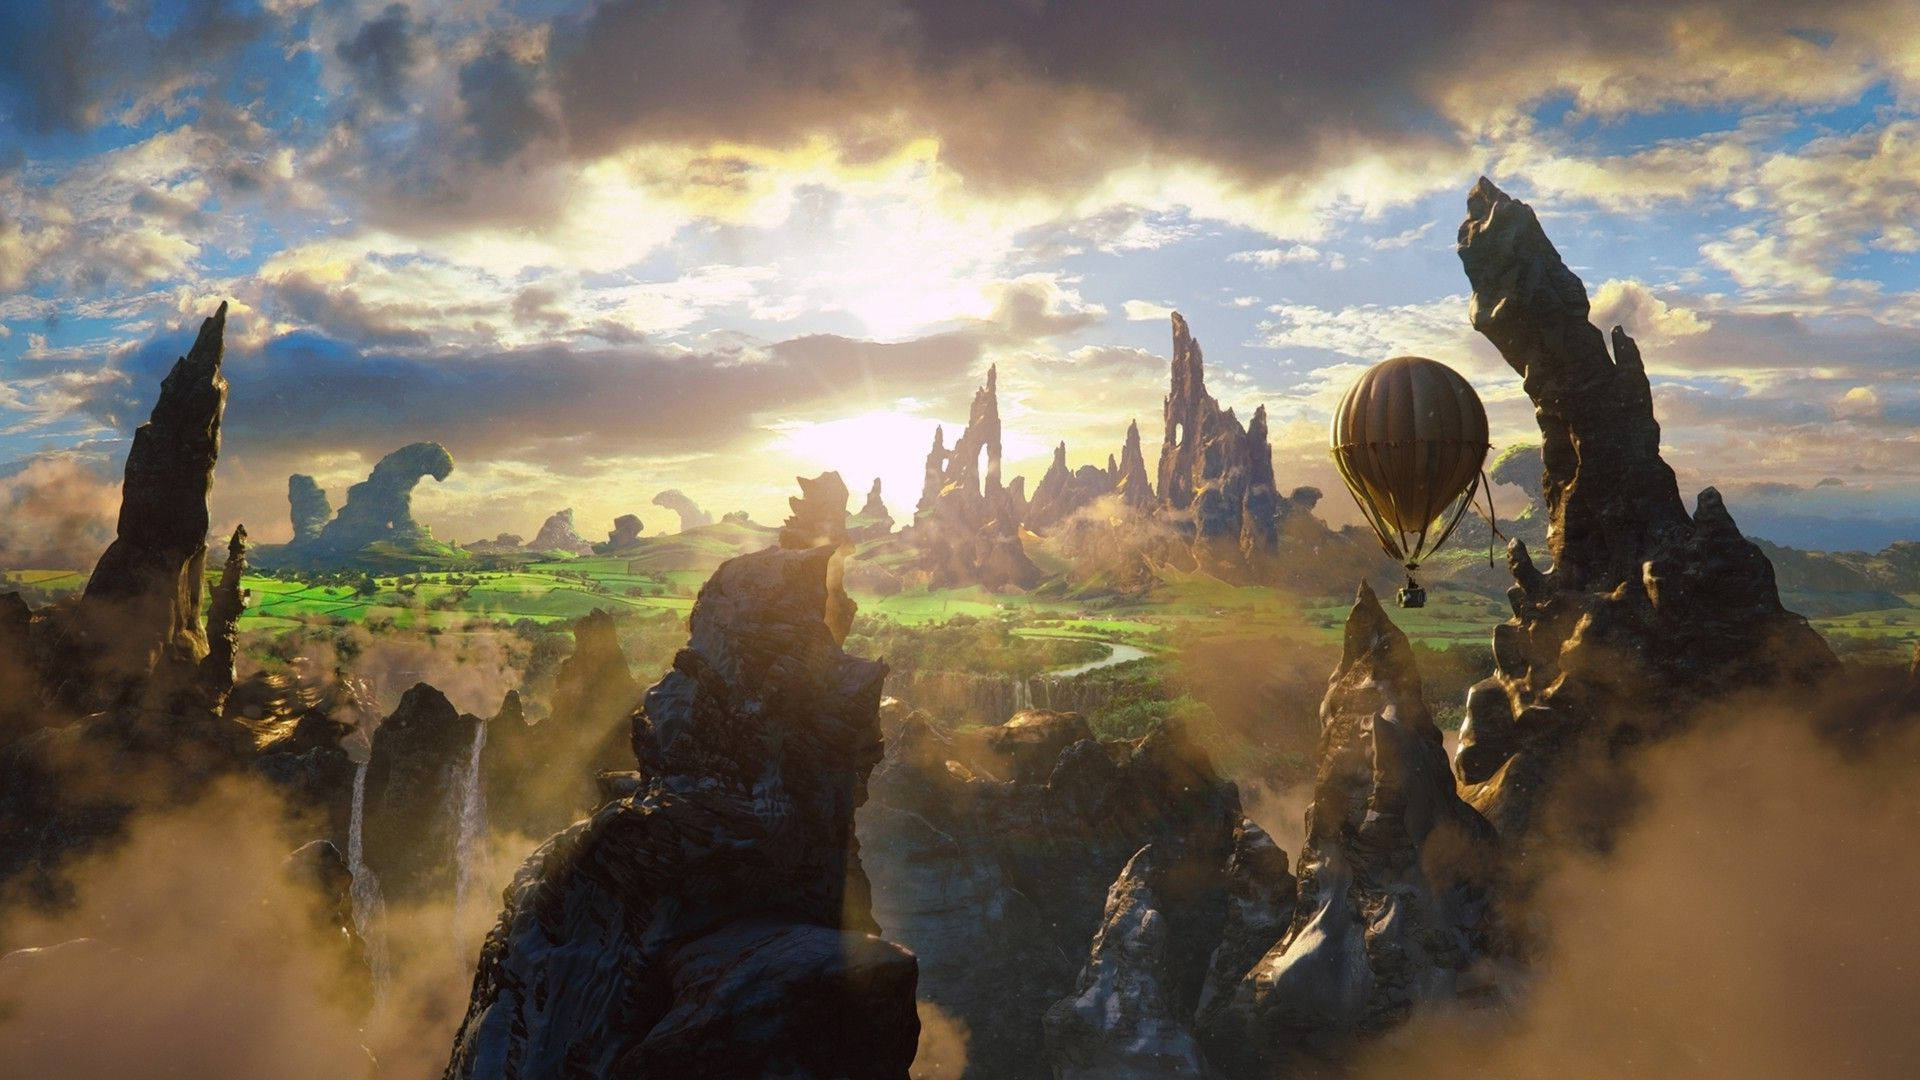 Oz The Great And Powerful Fantasy Landscape